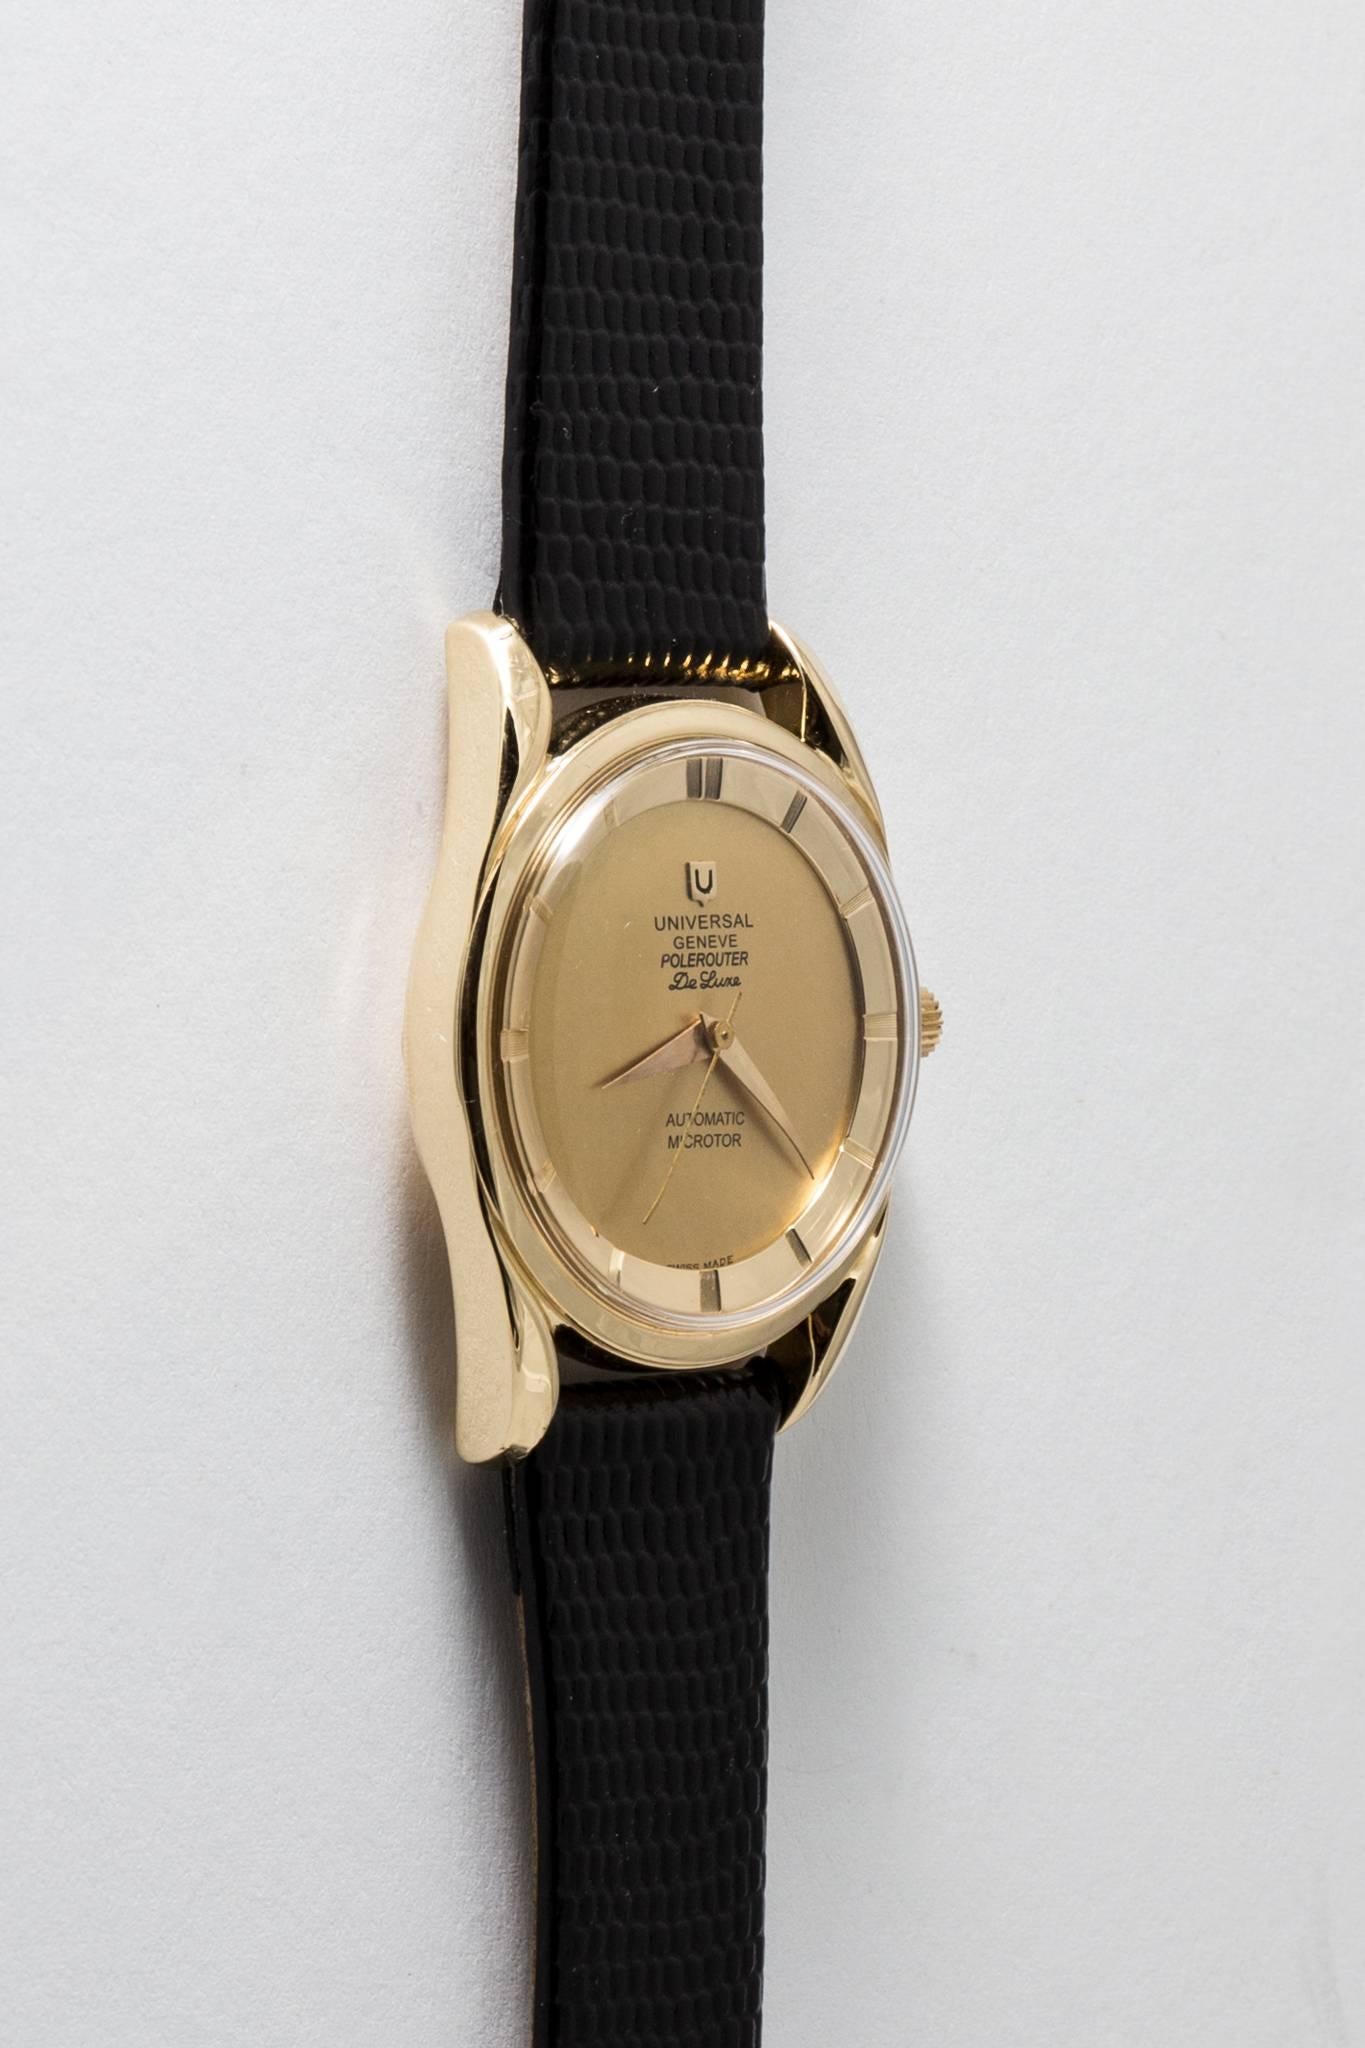 Beacon Hill Jewelers Presents:

A vintage mens Universal Geneve Polerouter De Luxe wrist watch in solid 18 karat yellow gold. Featuring a matte finish champagne dial surrounded by a brightly polished 18 karat gold ring engraved with the hours, this